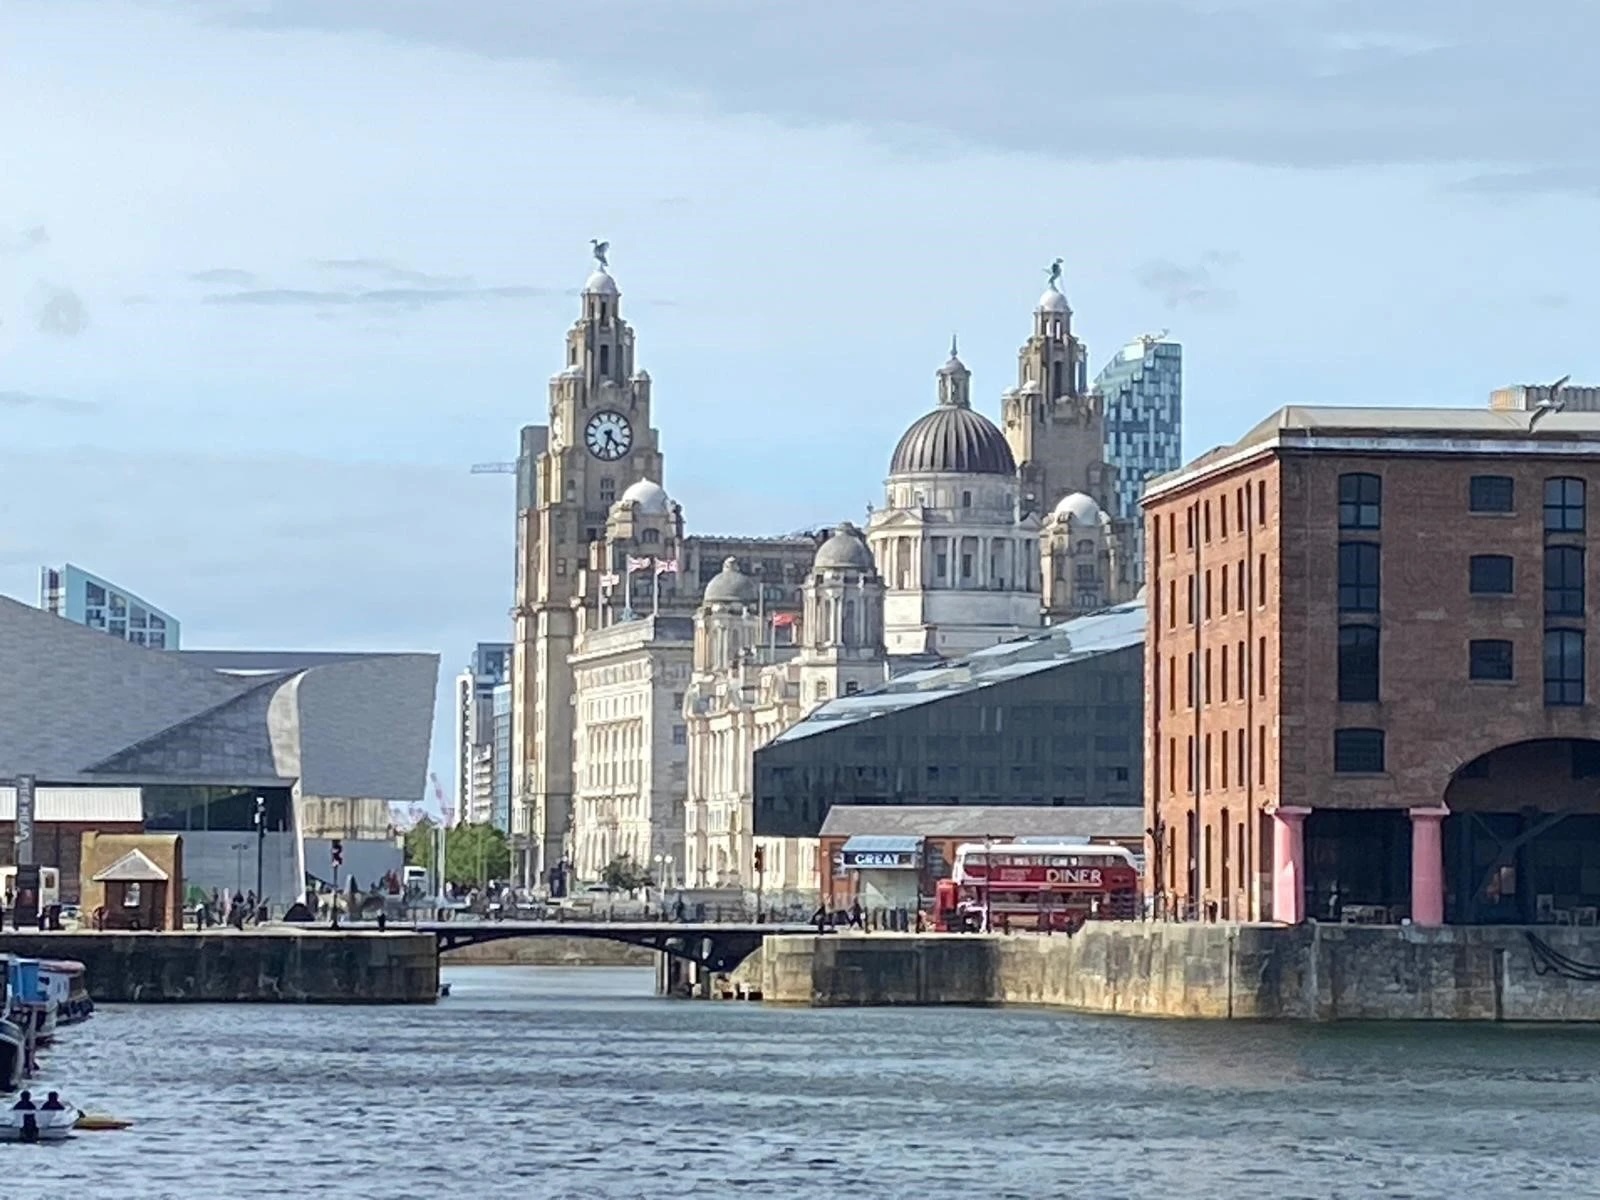 A photograph fo the river Mersey in Liverpool with buildings on both sides of the image and a brick buildingin in the foreground